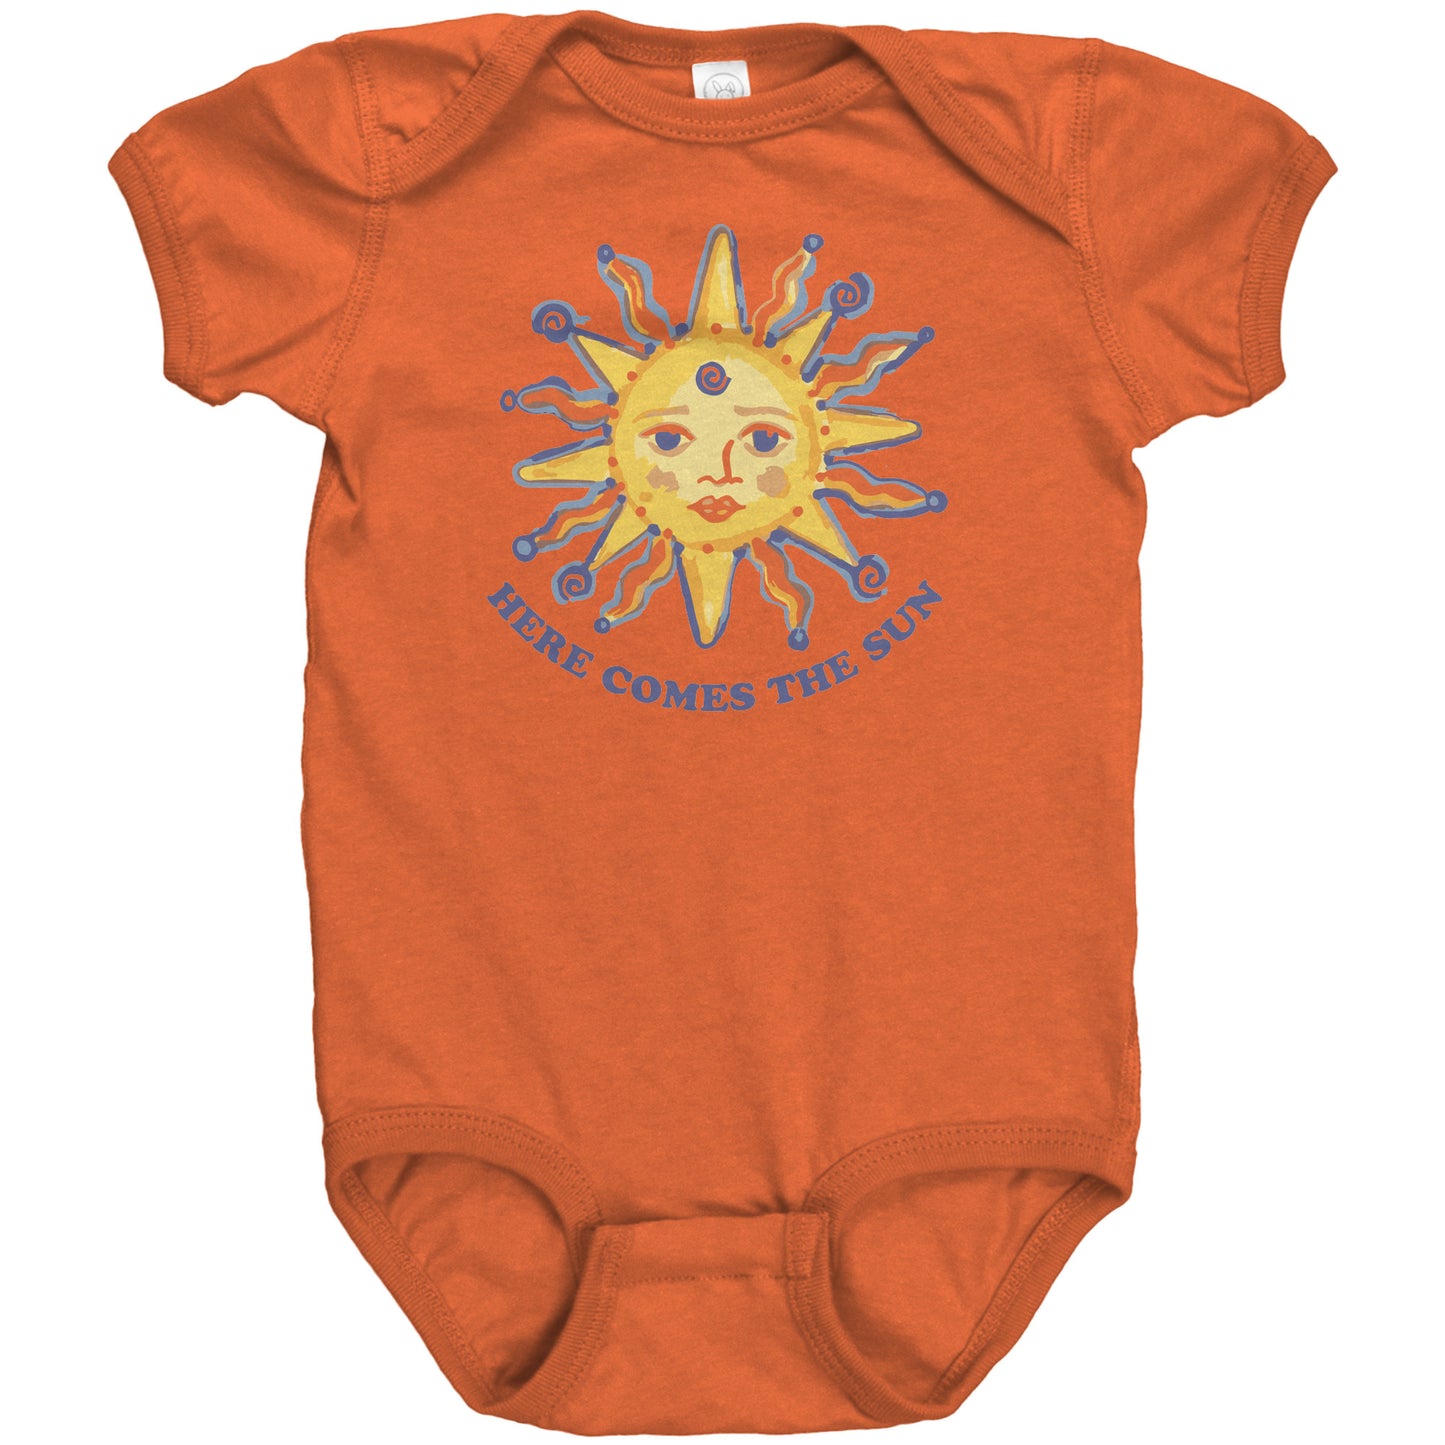 Here Comes The Sun - Infant Bodysuits